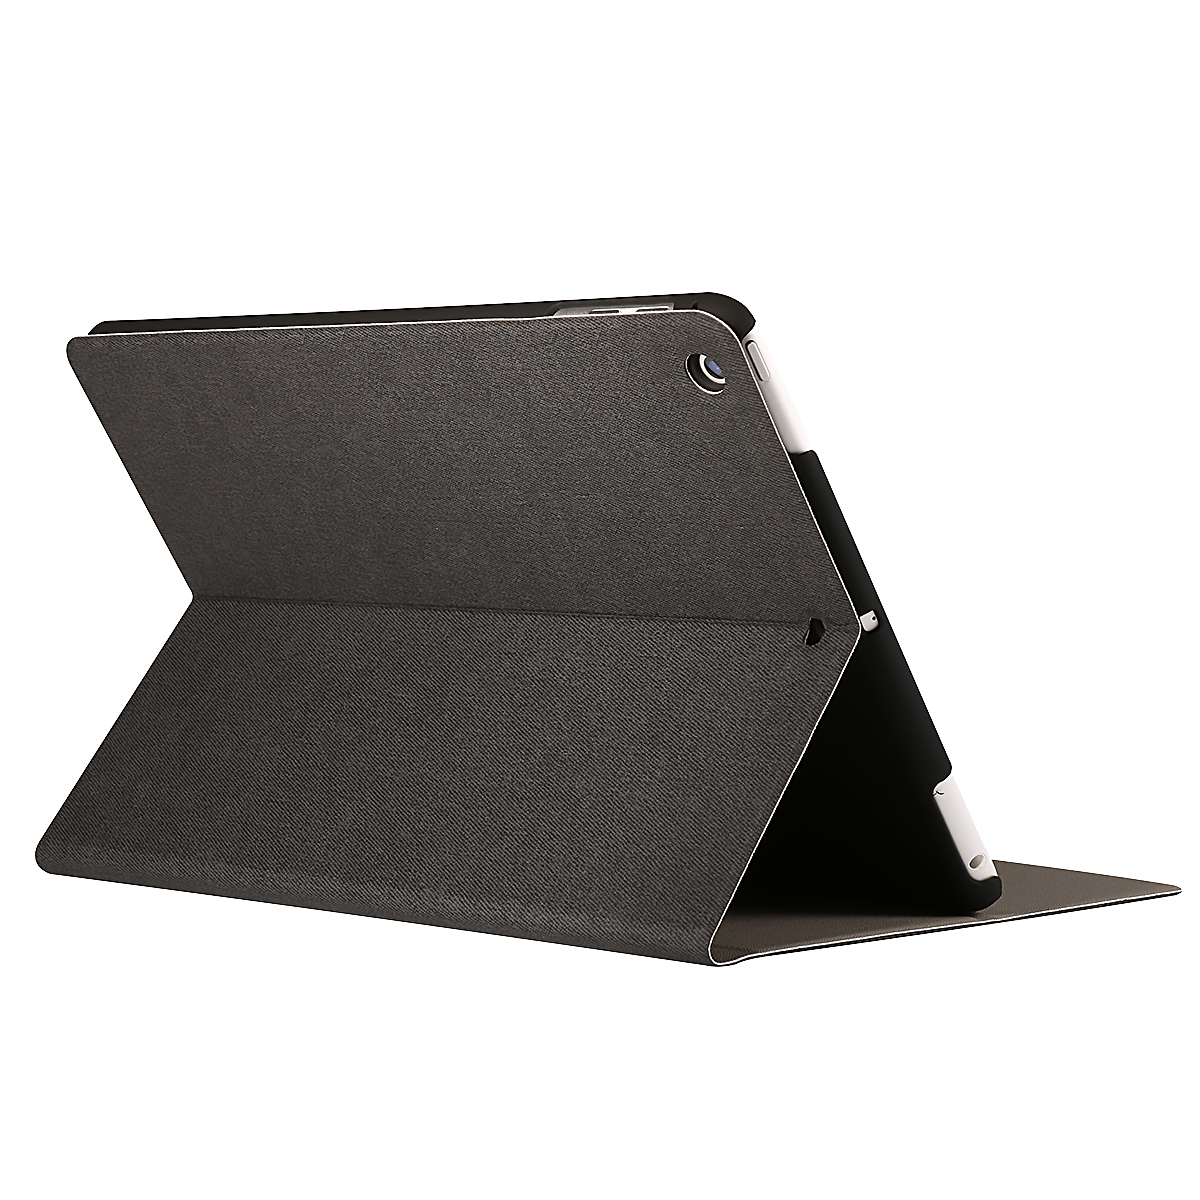 2 folds skidproof standing leather case for iPad